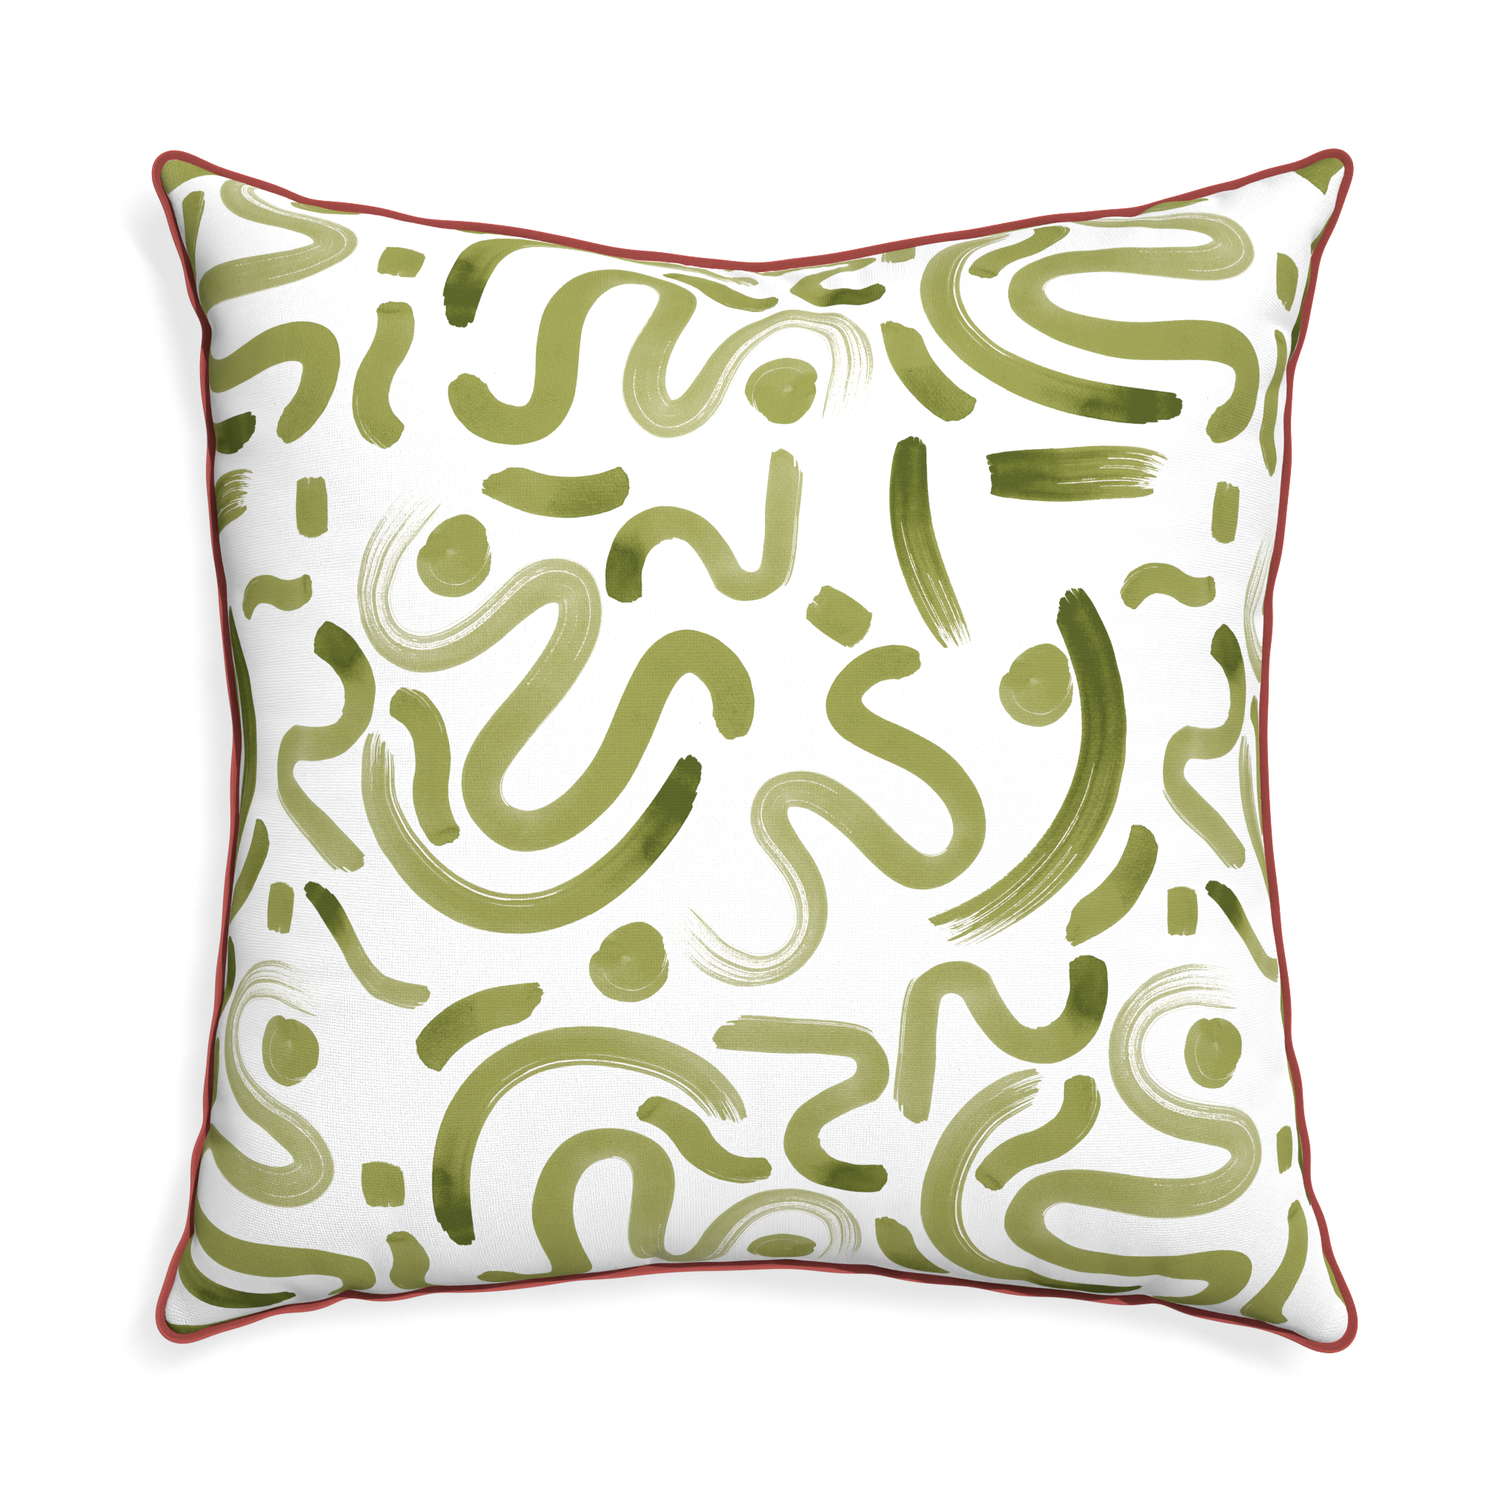 Euro-sham hockney moss custom pillow with c piping on white background